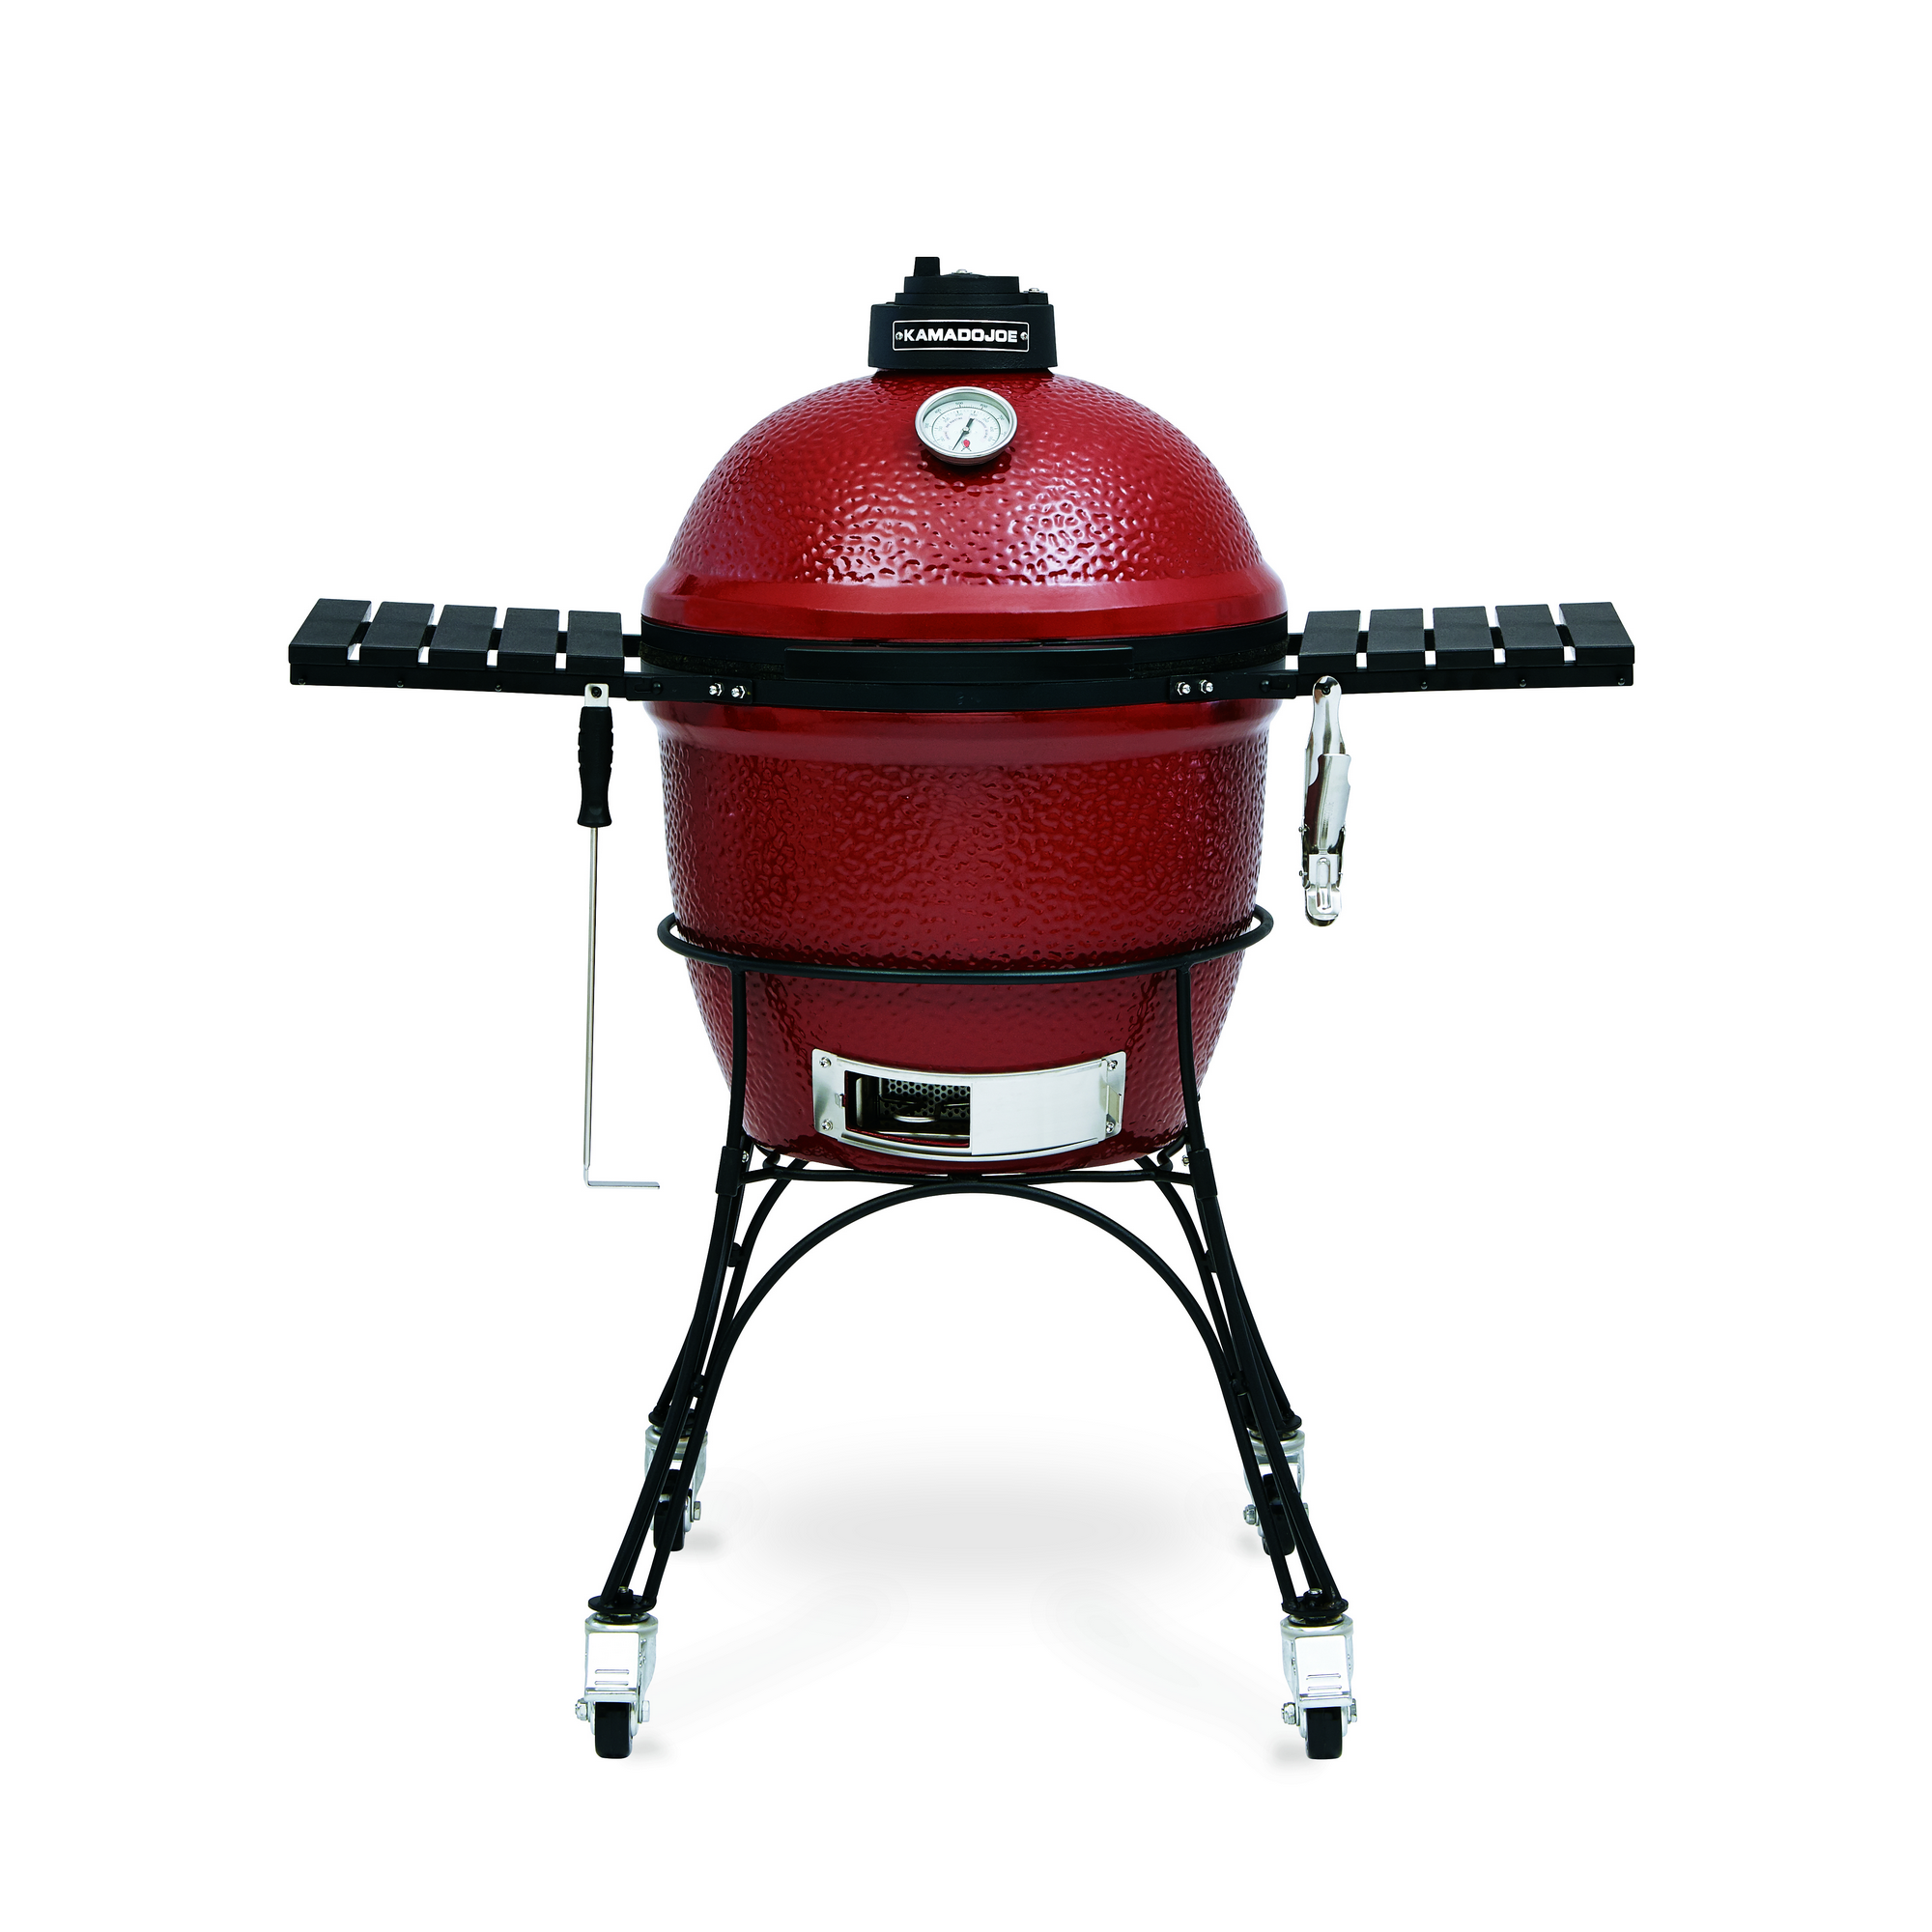 Keramikgrill 'Classic' rot/schwarz 118 x 122 x 71 cm, mit Thermometer + product picture